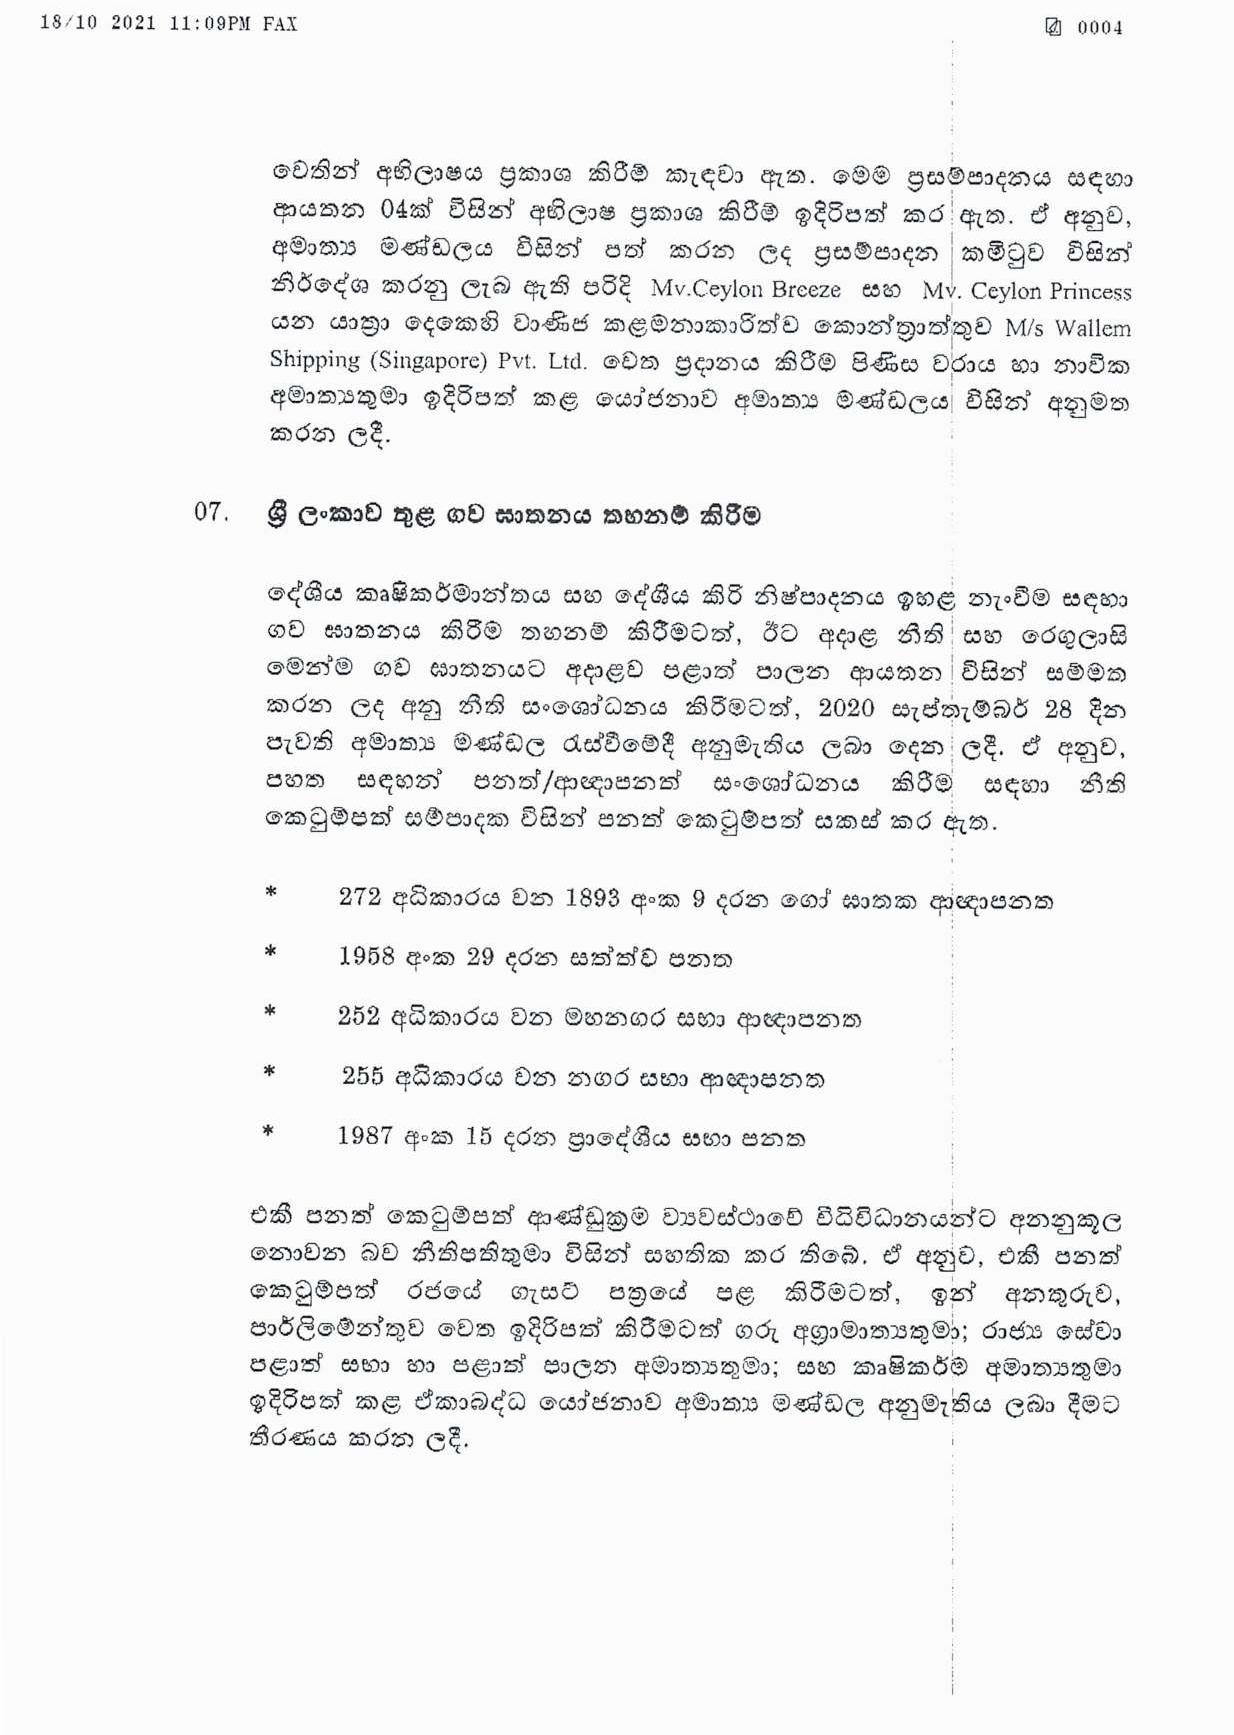 Cabinet Decision on 18.10.2021 compressed page 004